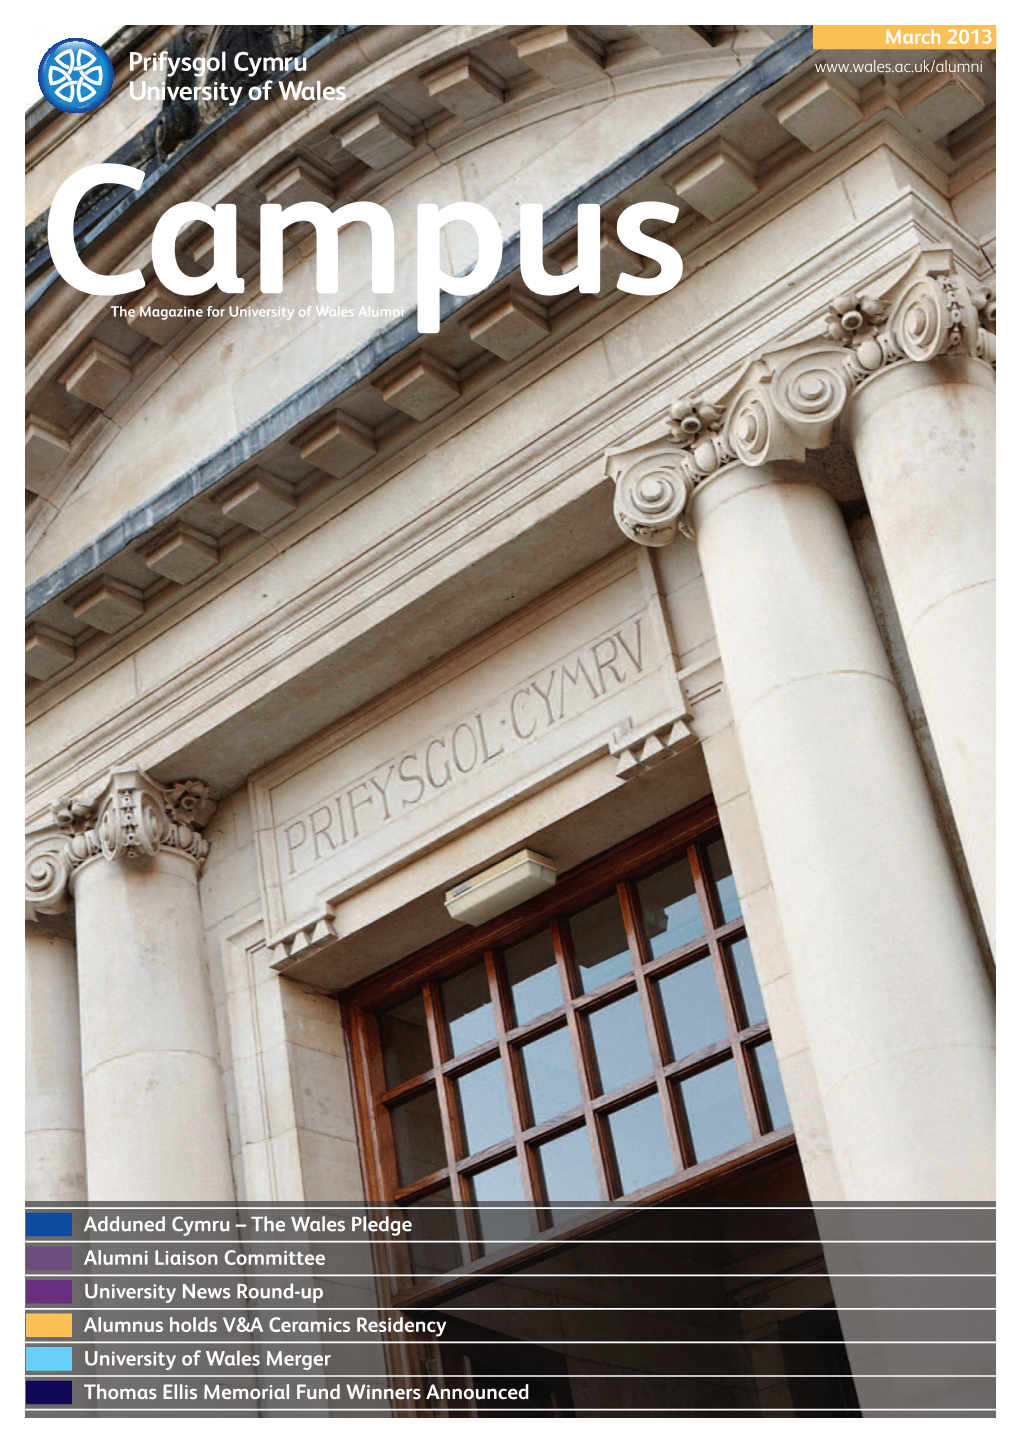 Campus Magazine Has Been Produced for Alumni to Complement the Regularly Updated Information Welcome Available on the University’S Website